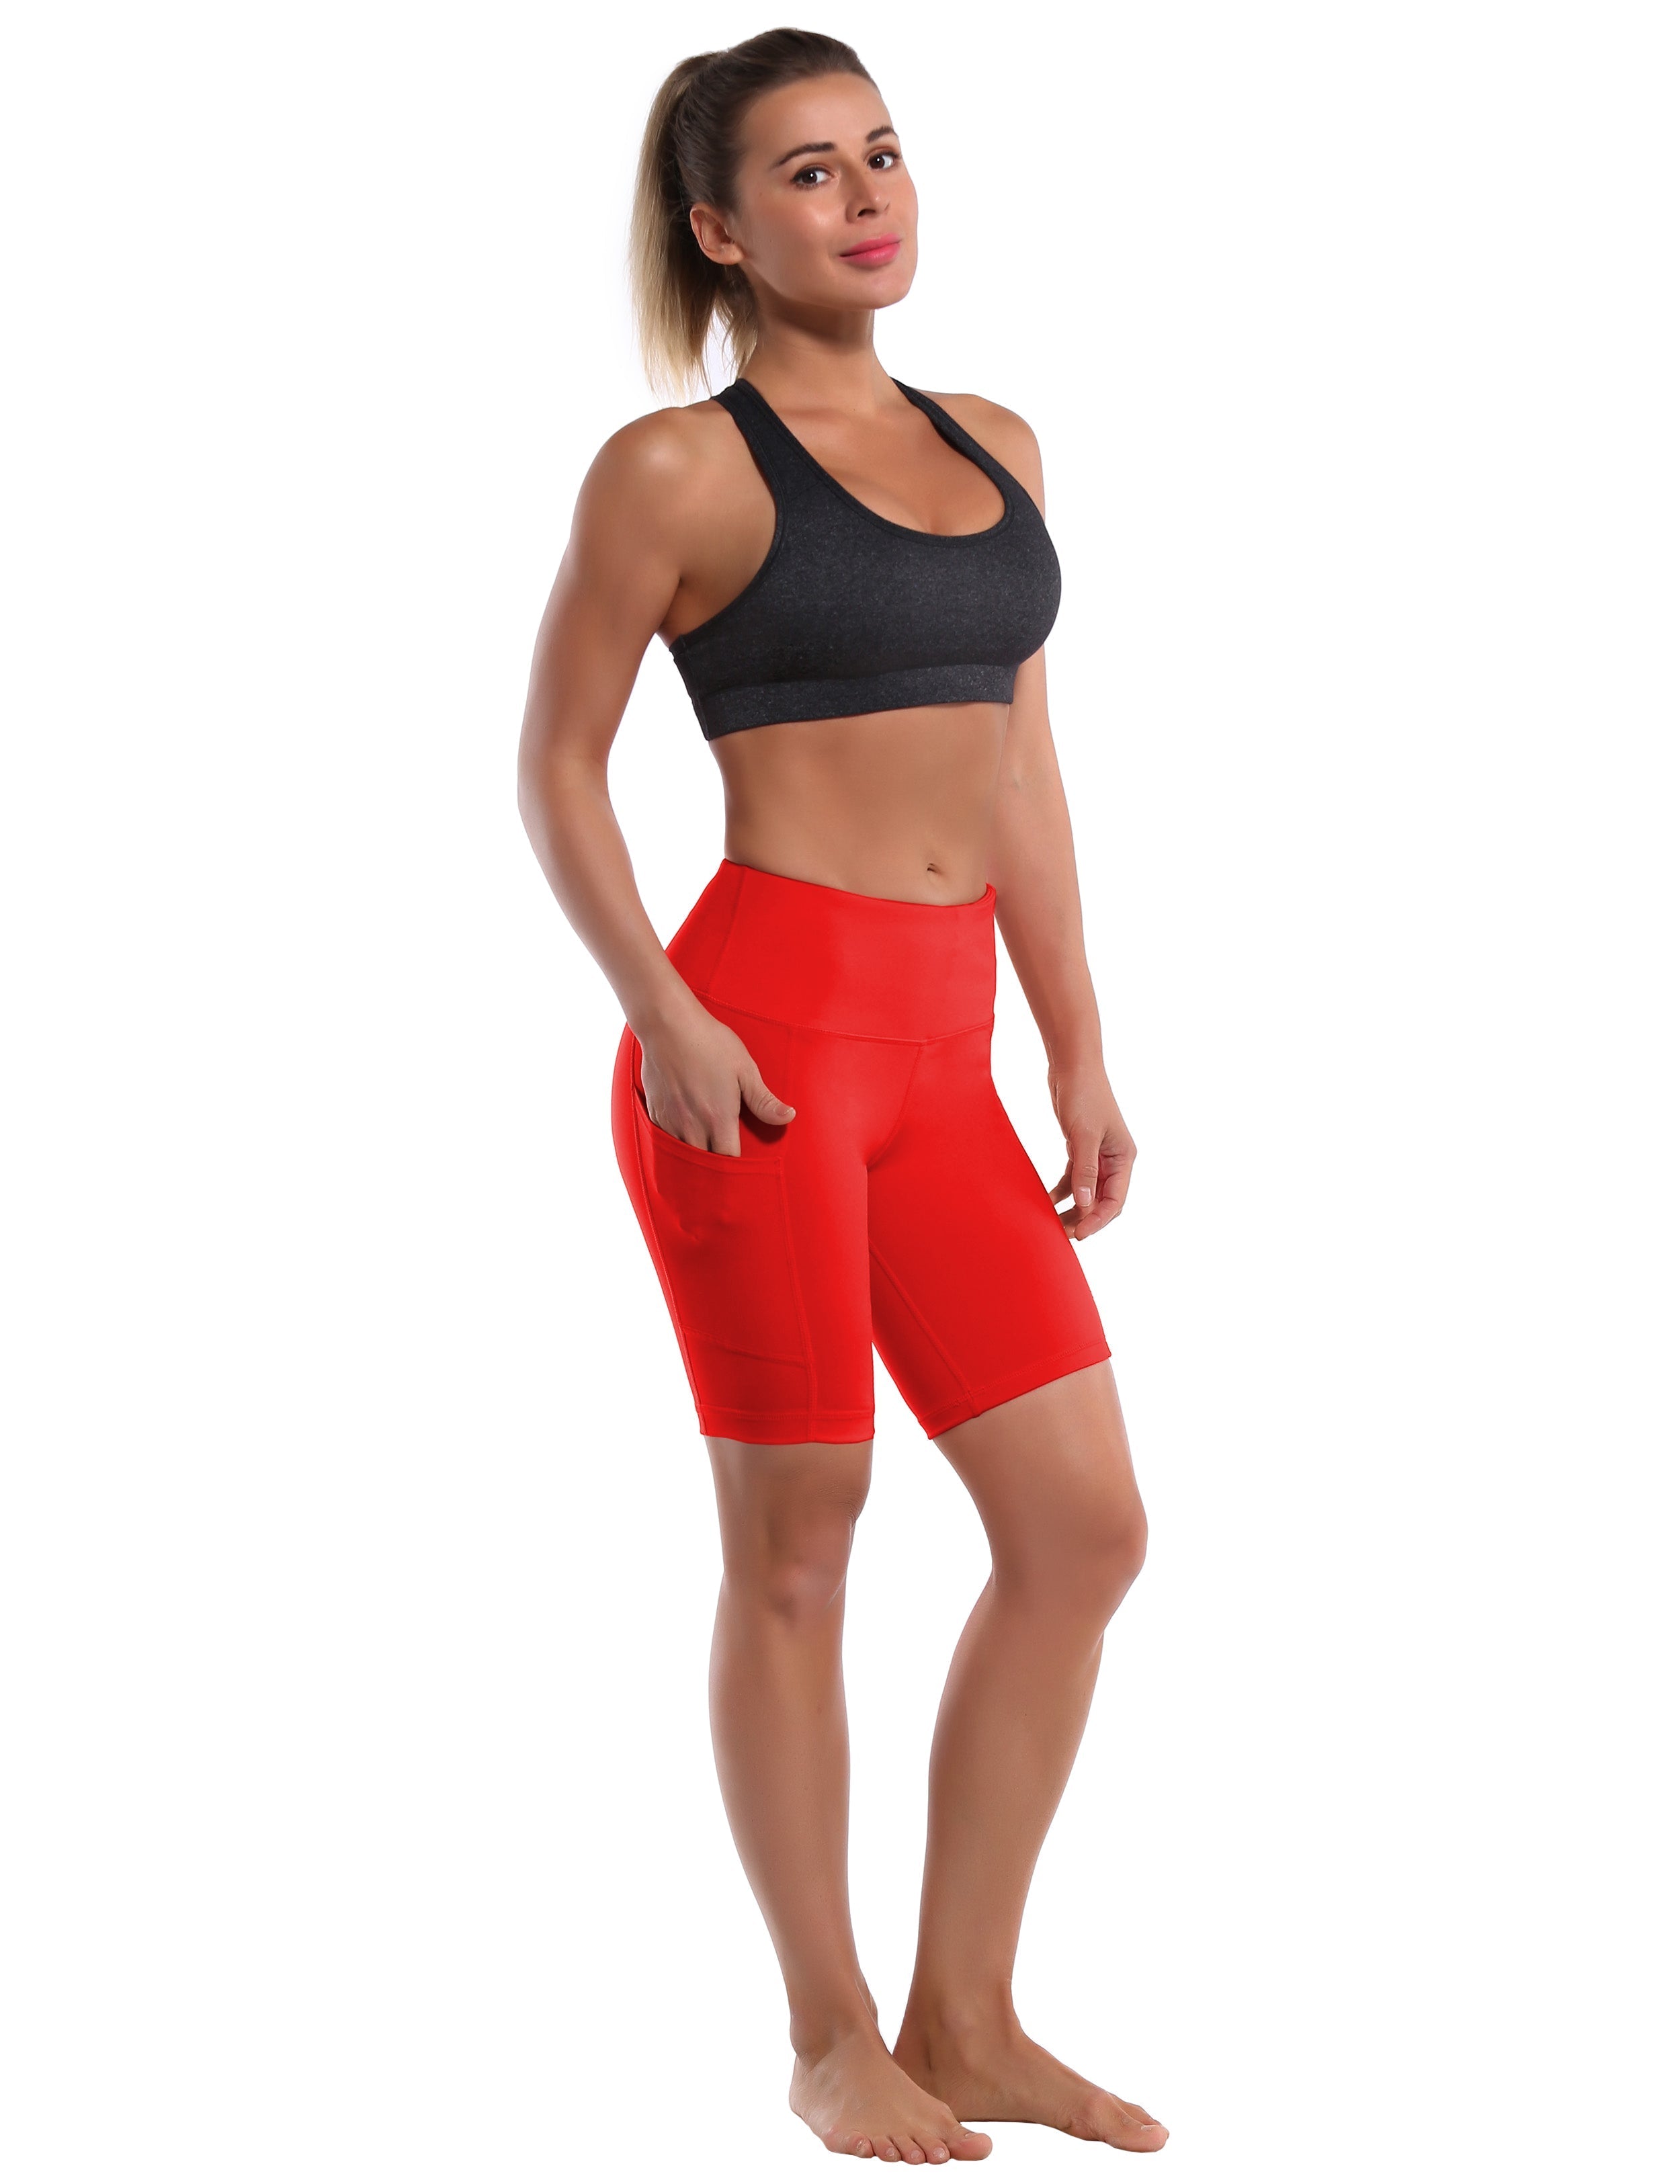 8" Side Pockets yogastudio Shorts scarlet Sleek, soft, smooth and totally comfortable: our newest style is here. Softest-ever fabric High elasticity High density 4-way stretch Fabric doesn't attract lint easily No see-through Moisture-wicking Machine wash 75% Nylon, 25% Spandex